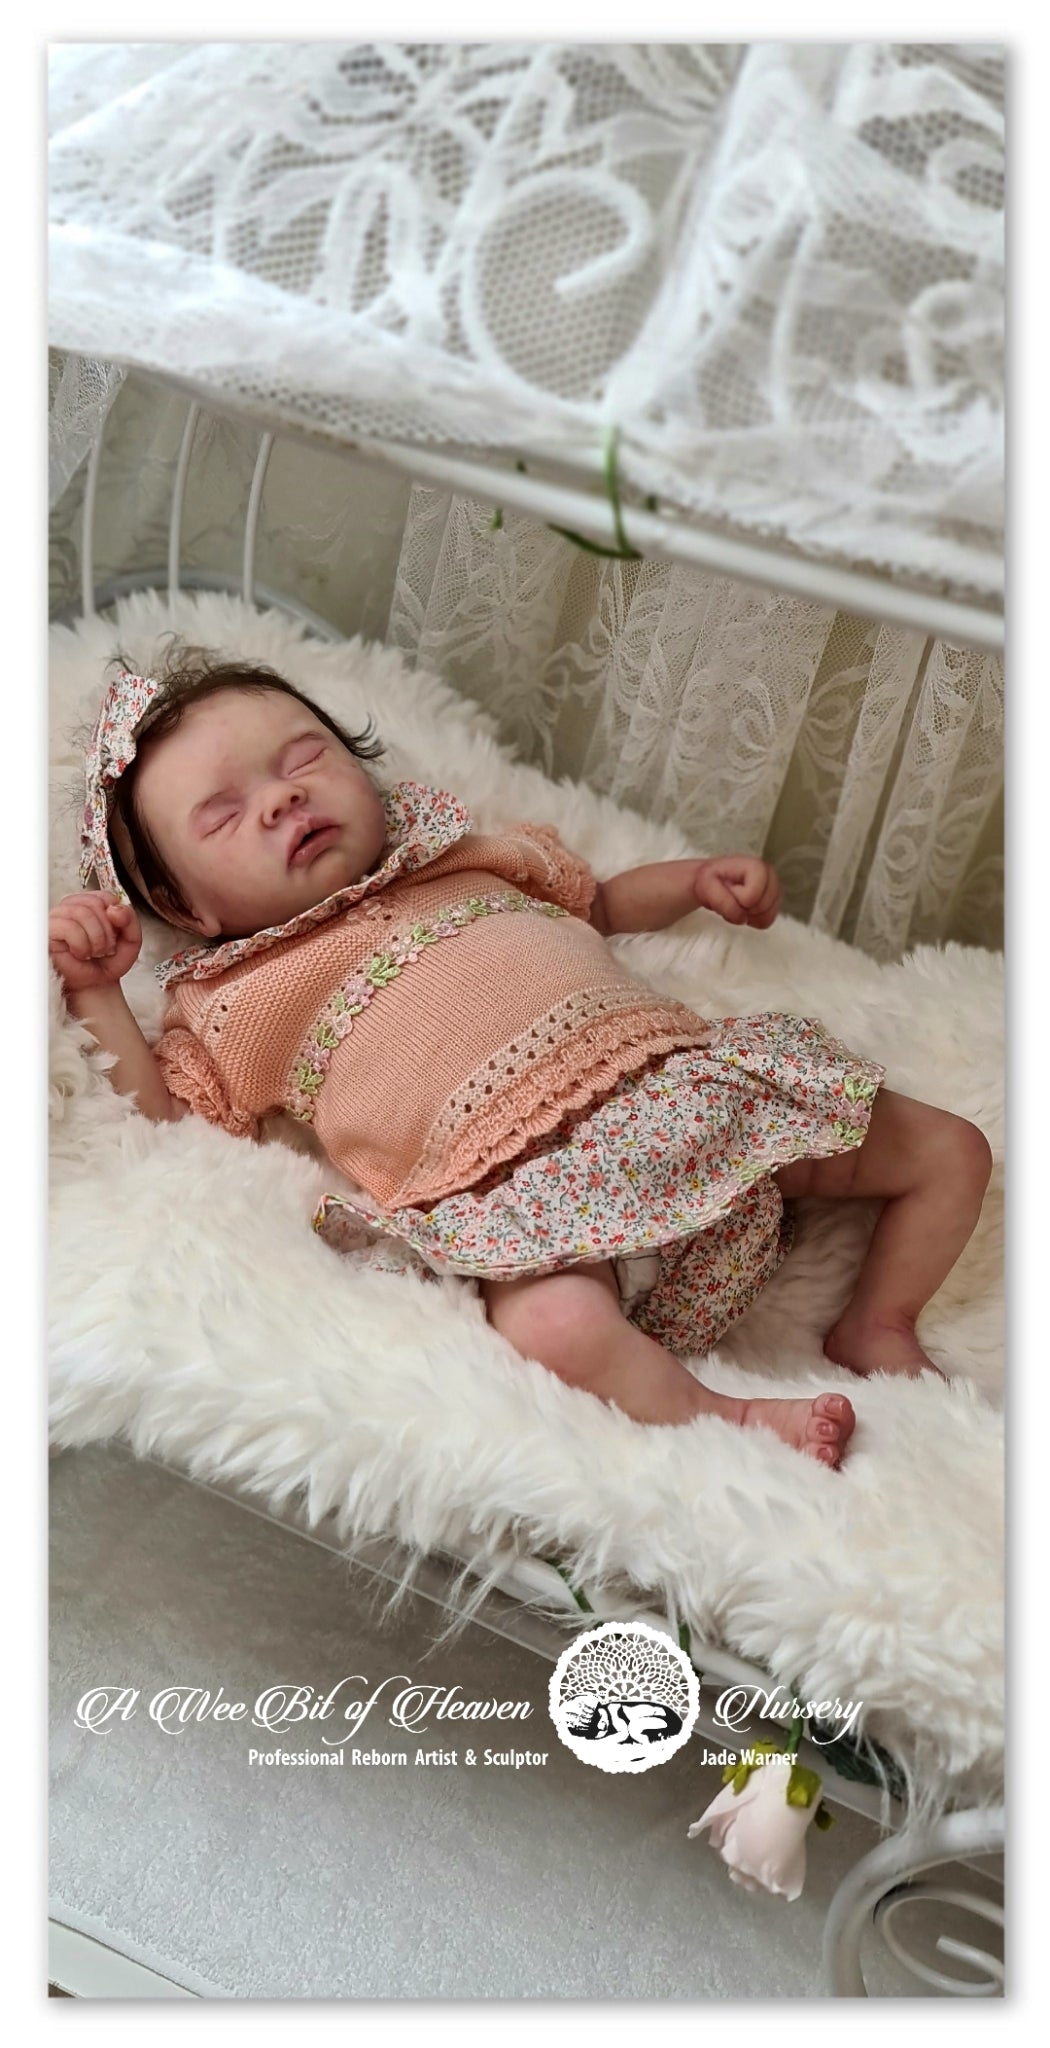 Olivia Rose  Silicone Baby Sculpted by Monica Kaye (MK.ArtDolls)